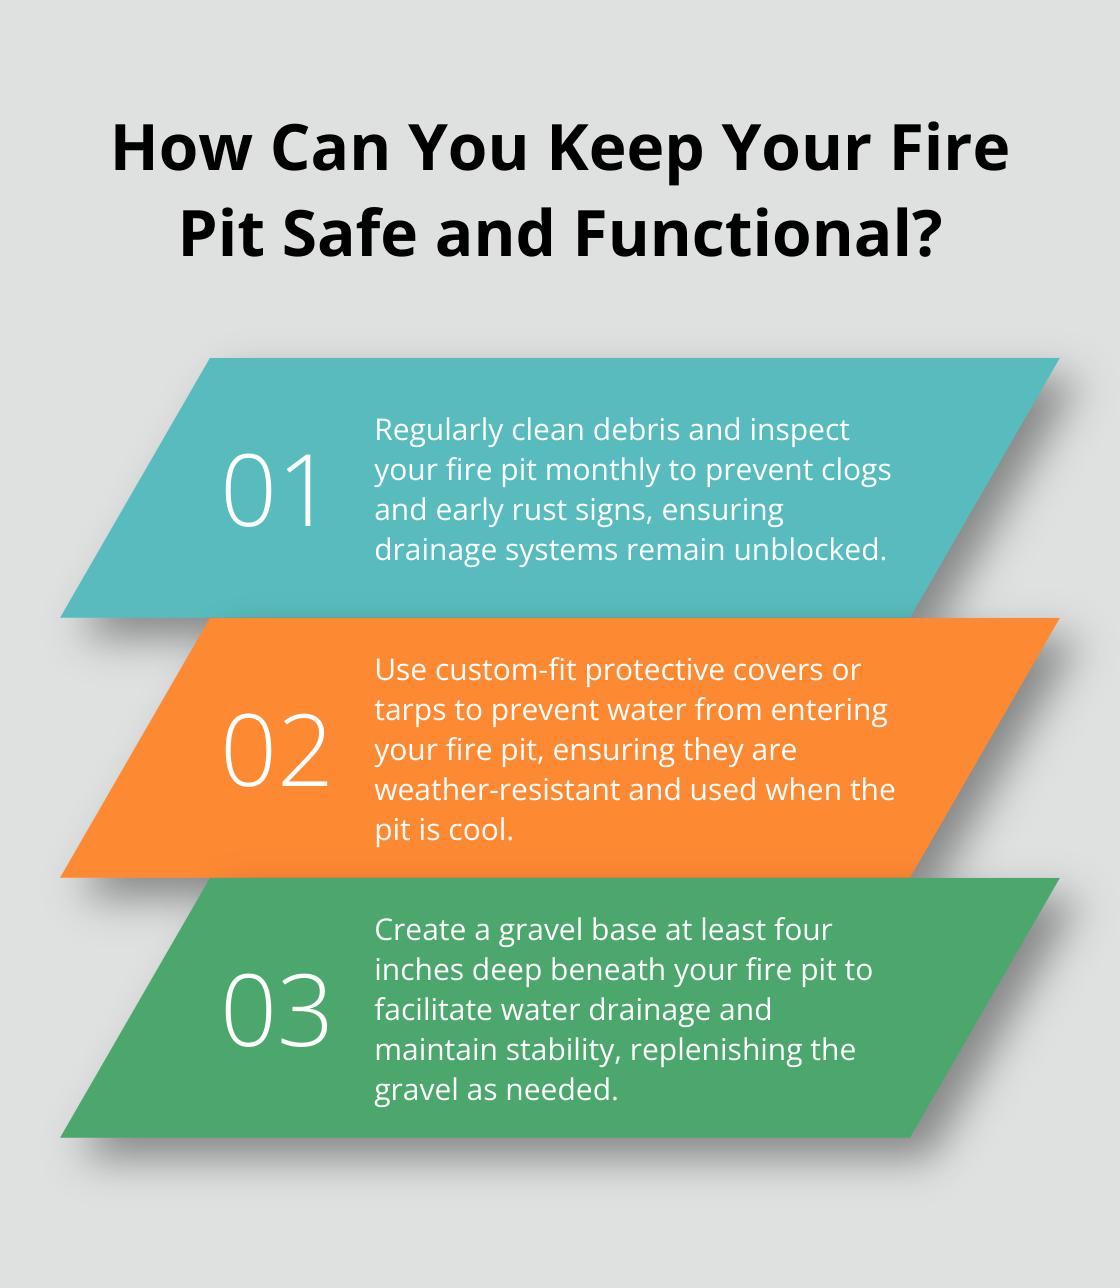 Fact - How Can You Keep Your Fire Pit Safe and Functional?